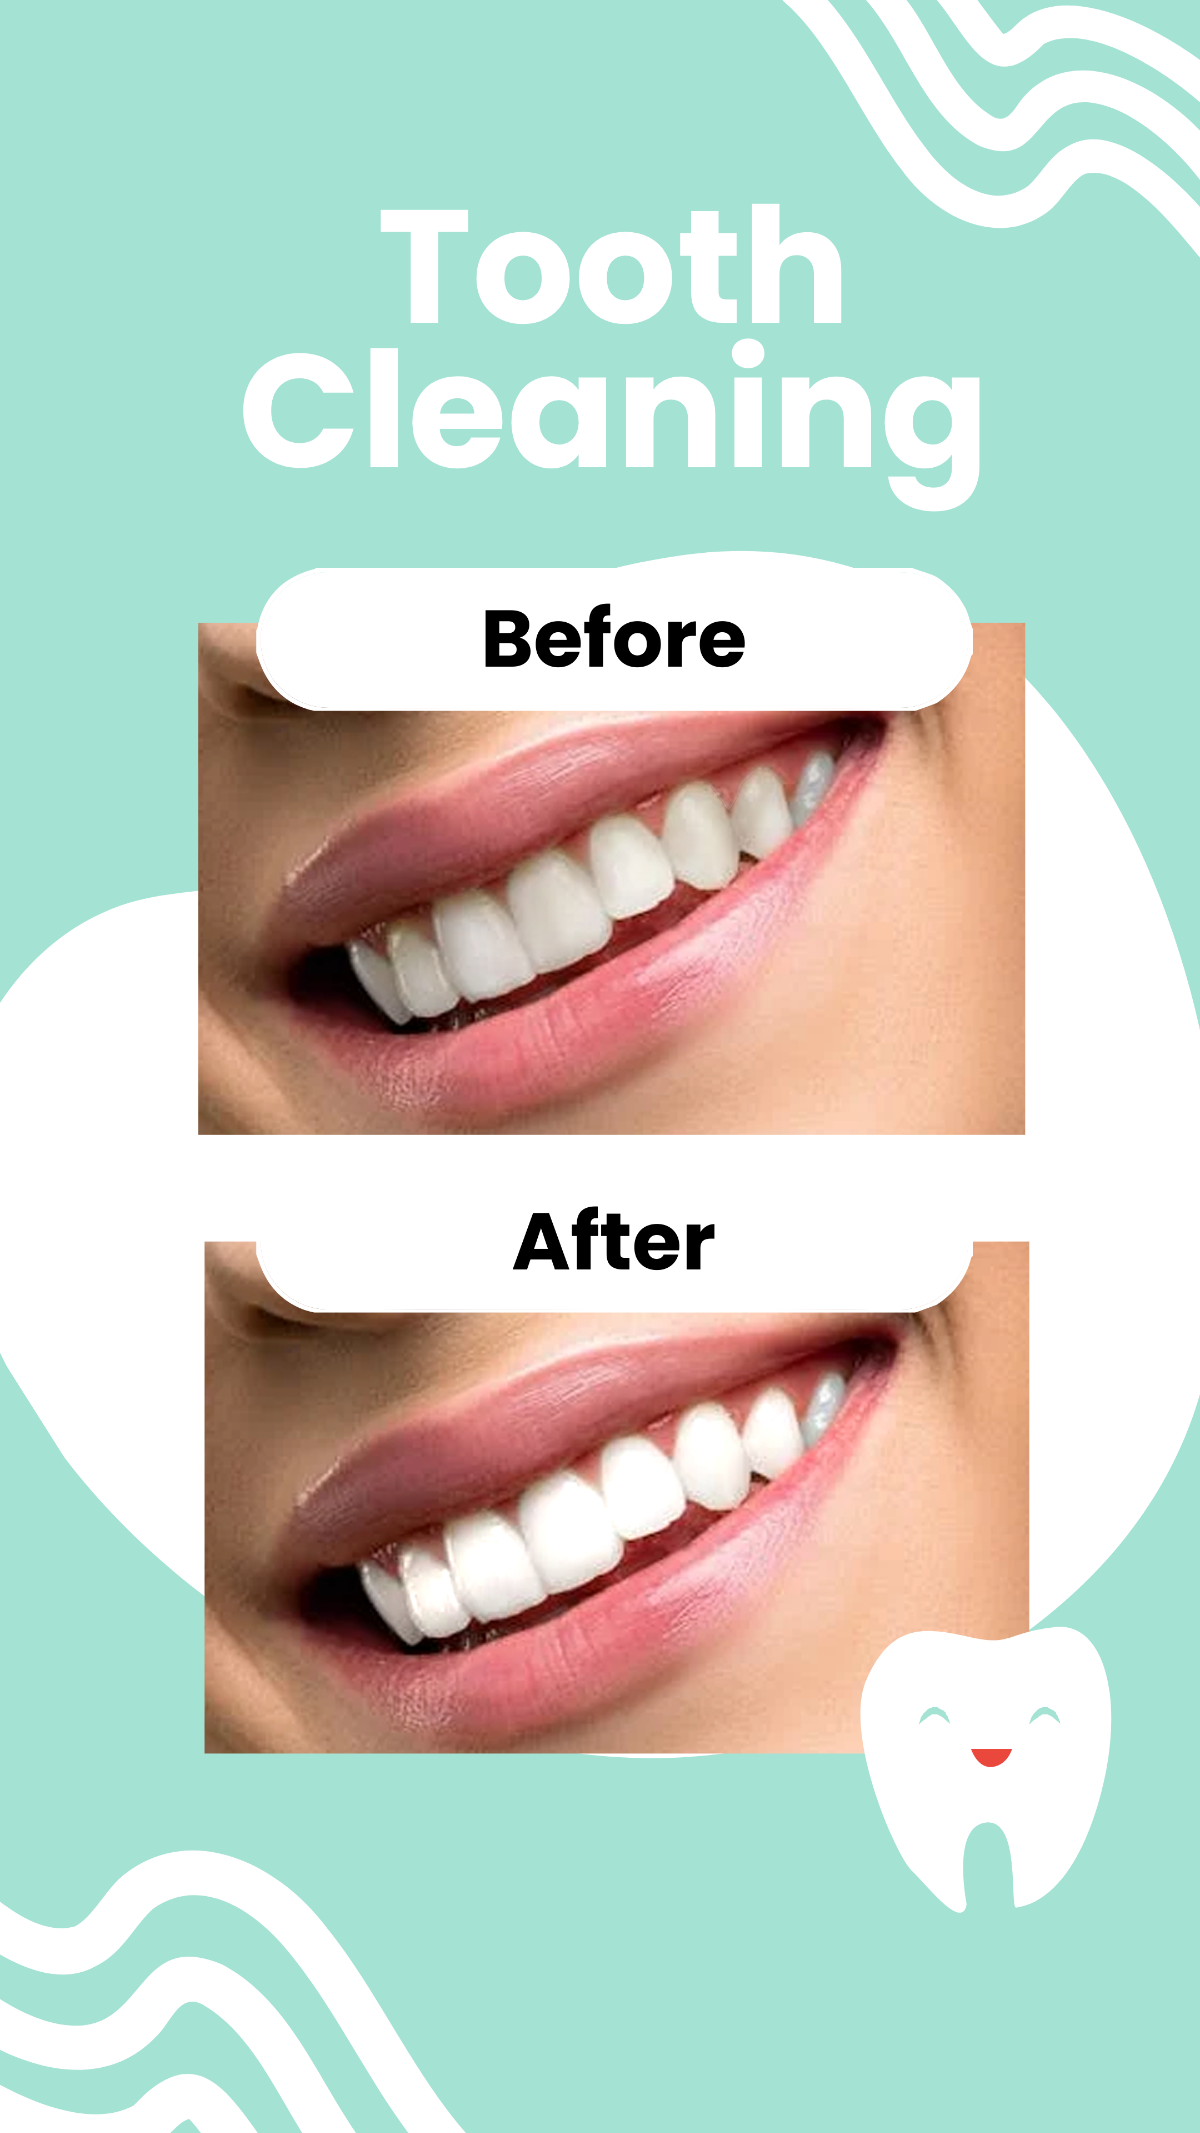 Before and After Tooth Cleaning Facebook Post